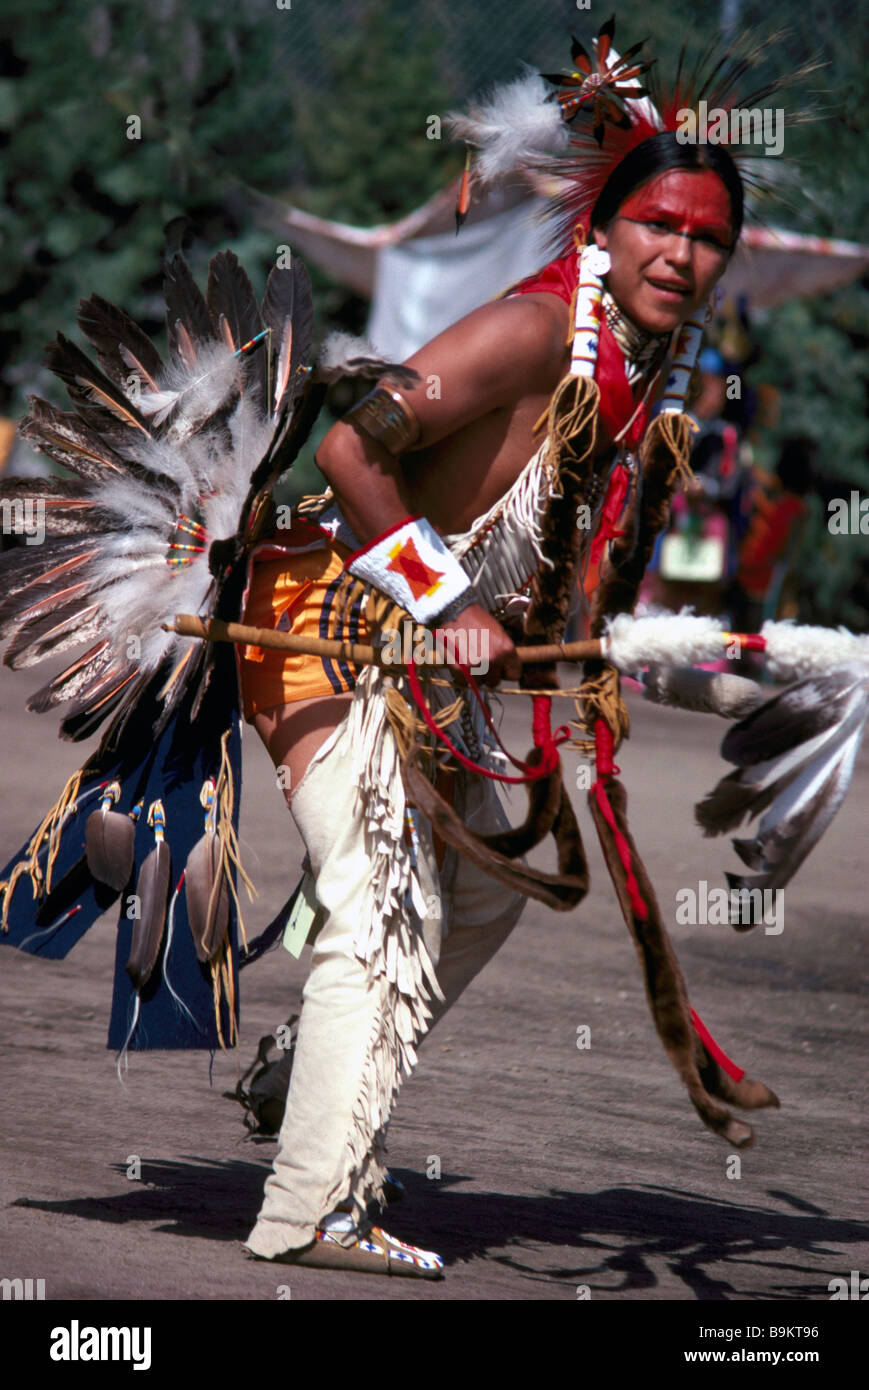 Native American Indian Dancer in Traditional Regalia at a Pow Wow on an ...